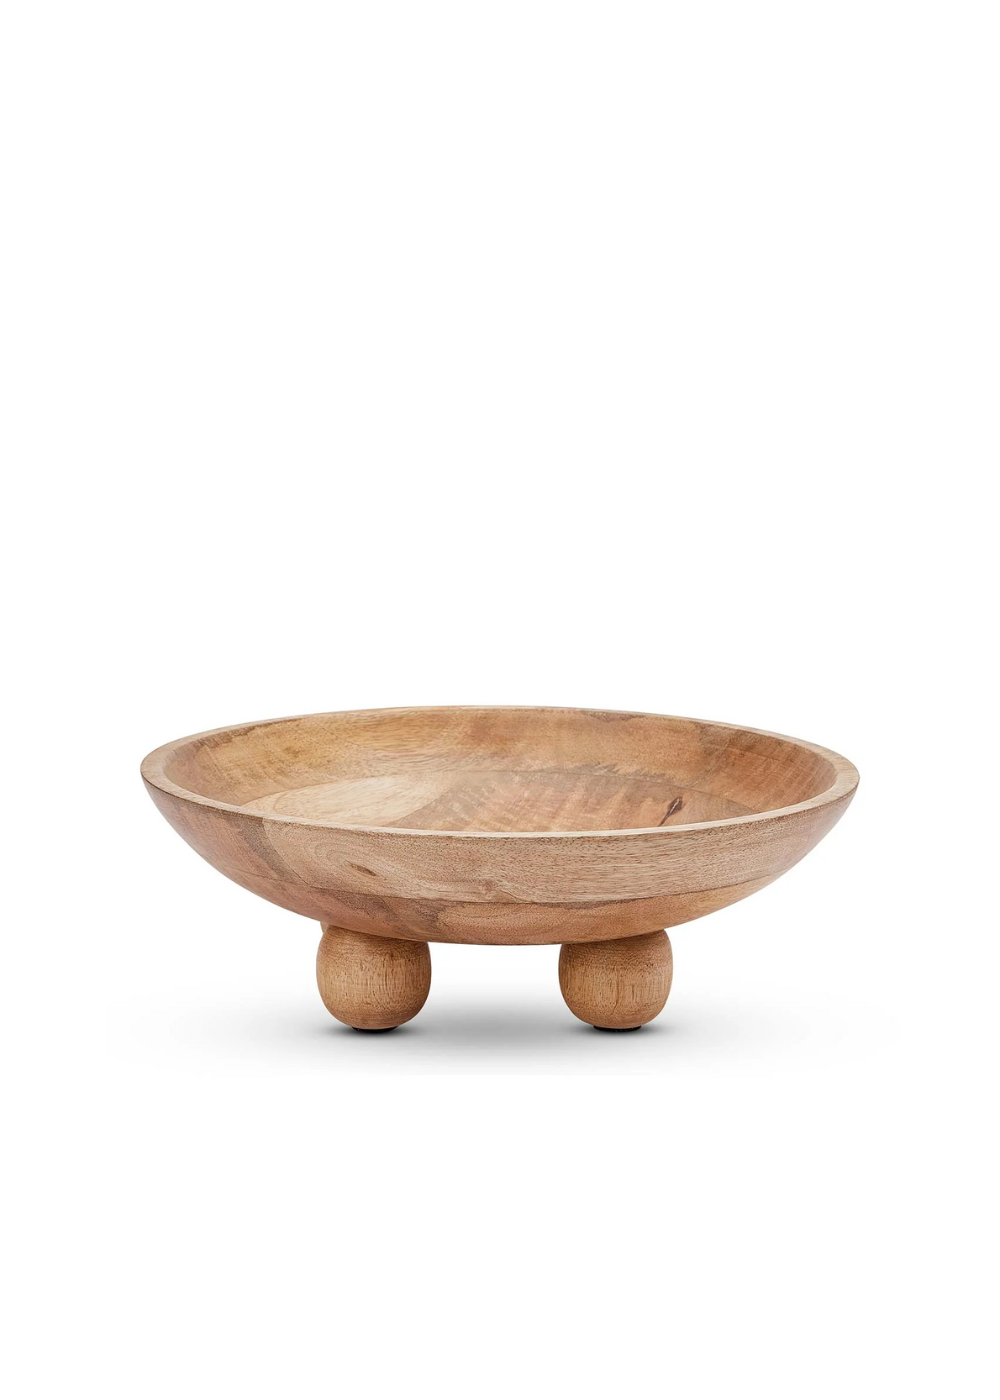 angus round footed bowl